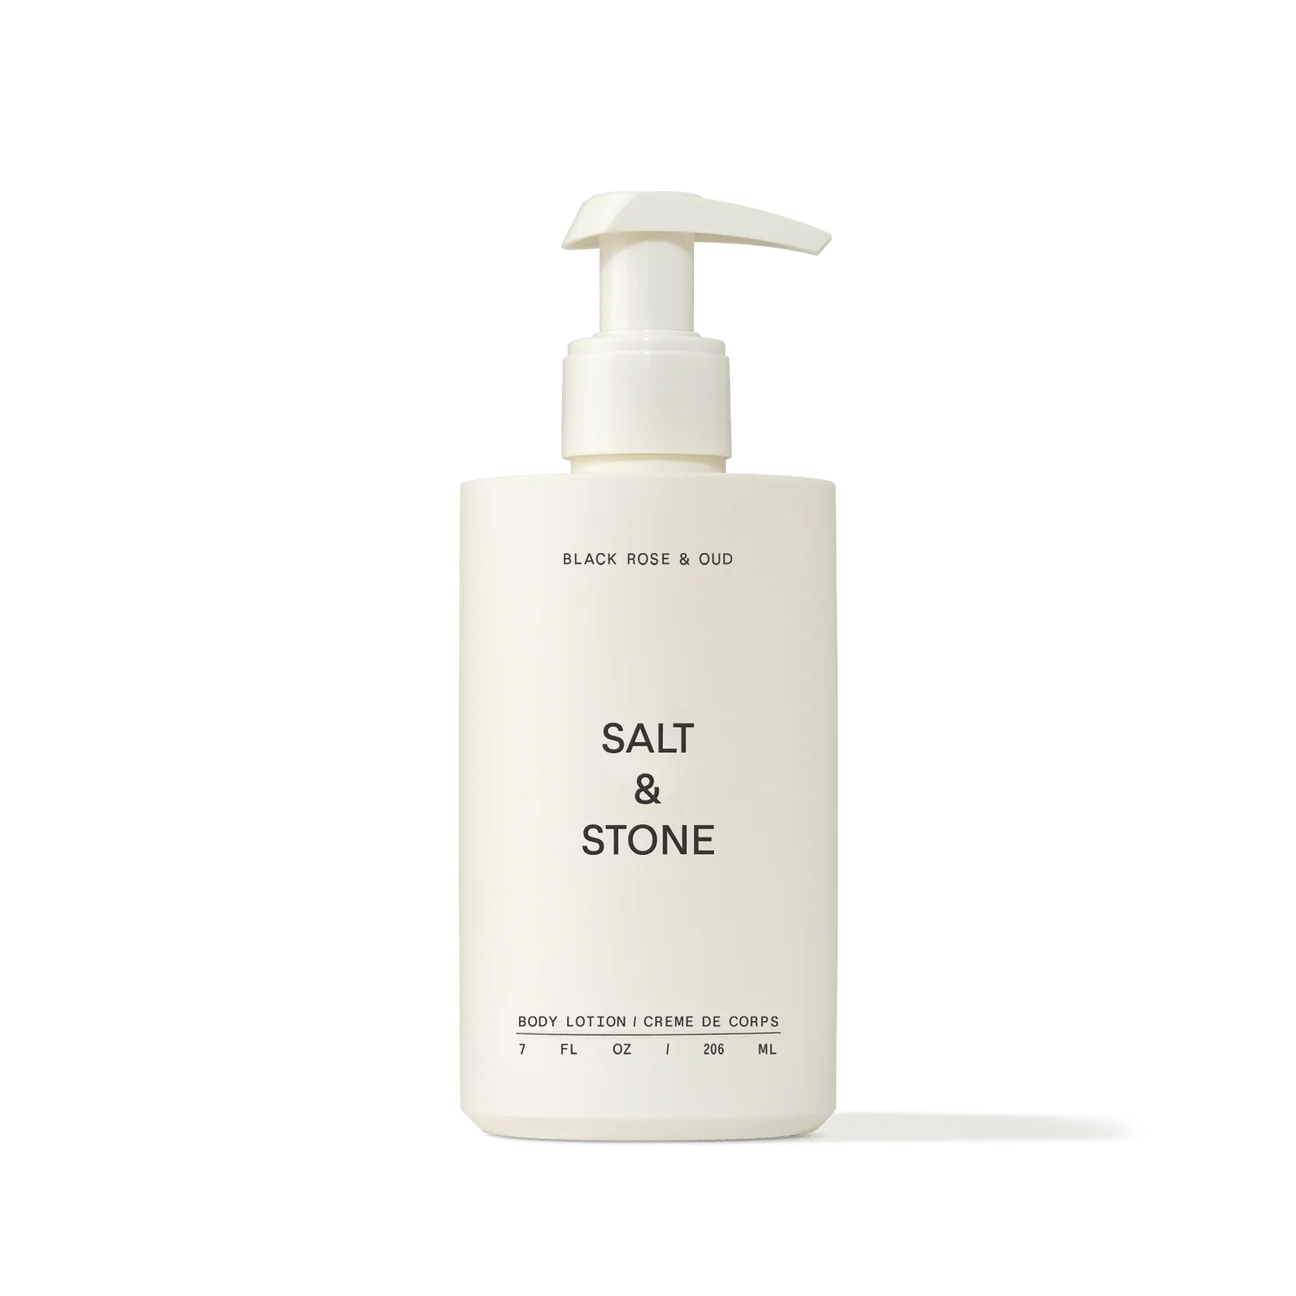 SALT & STONE - Body lotion - The Natural Beauty Club